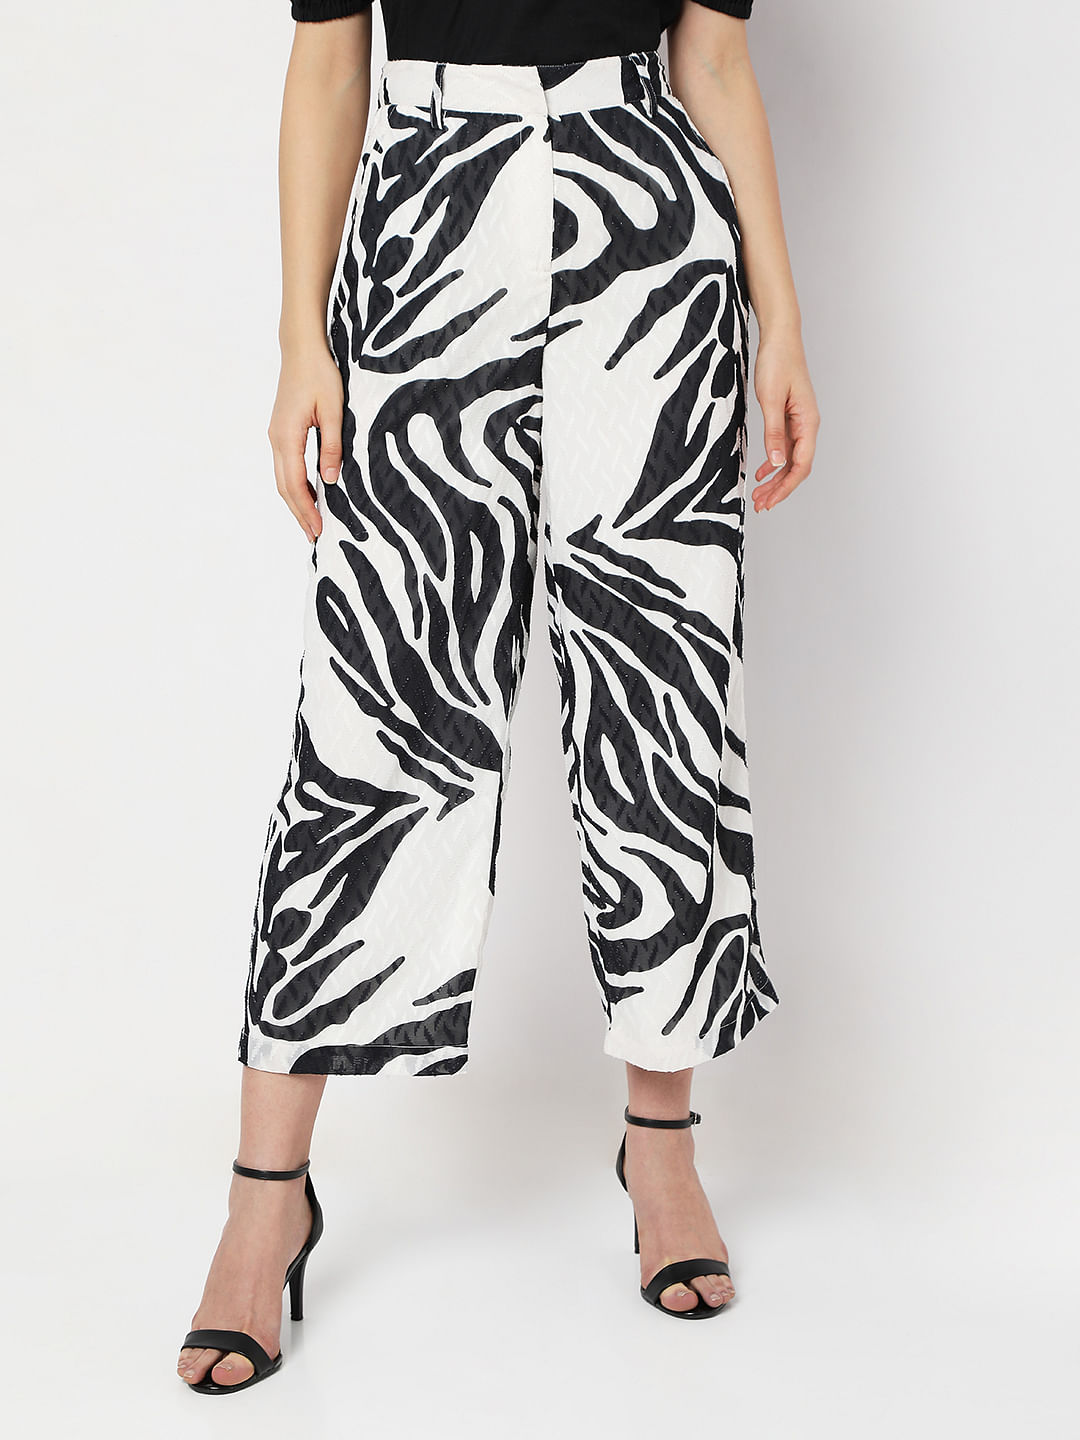 Jeans & Trousers | Black And White Print Pants With Zip | Freeup